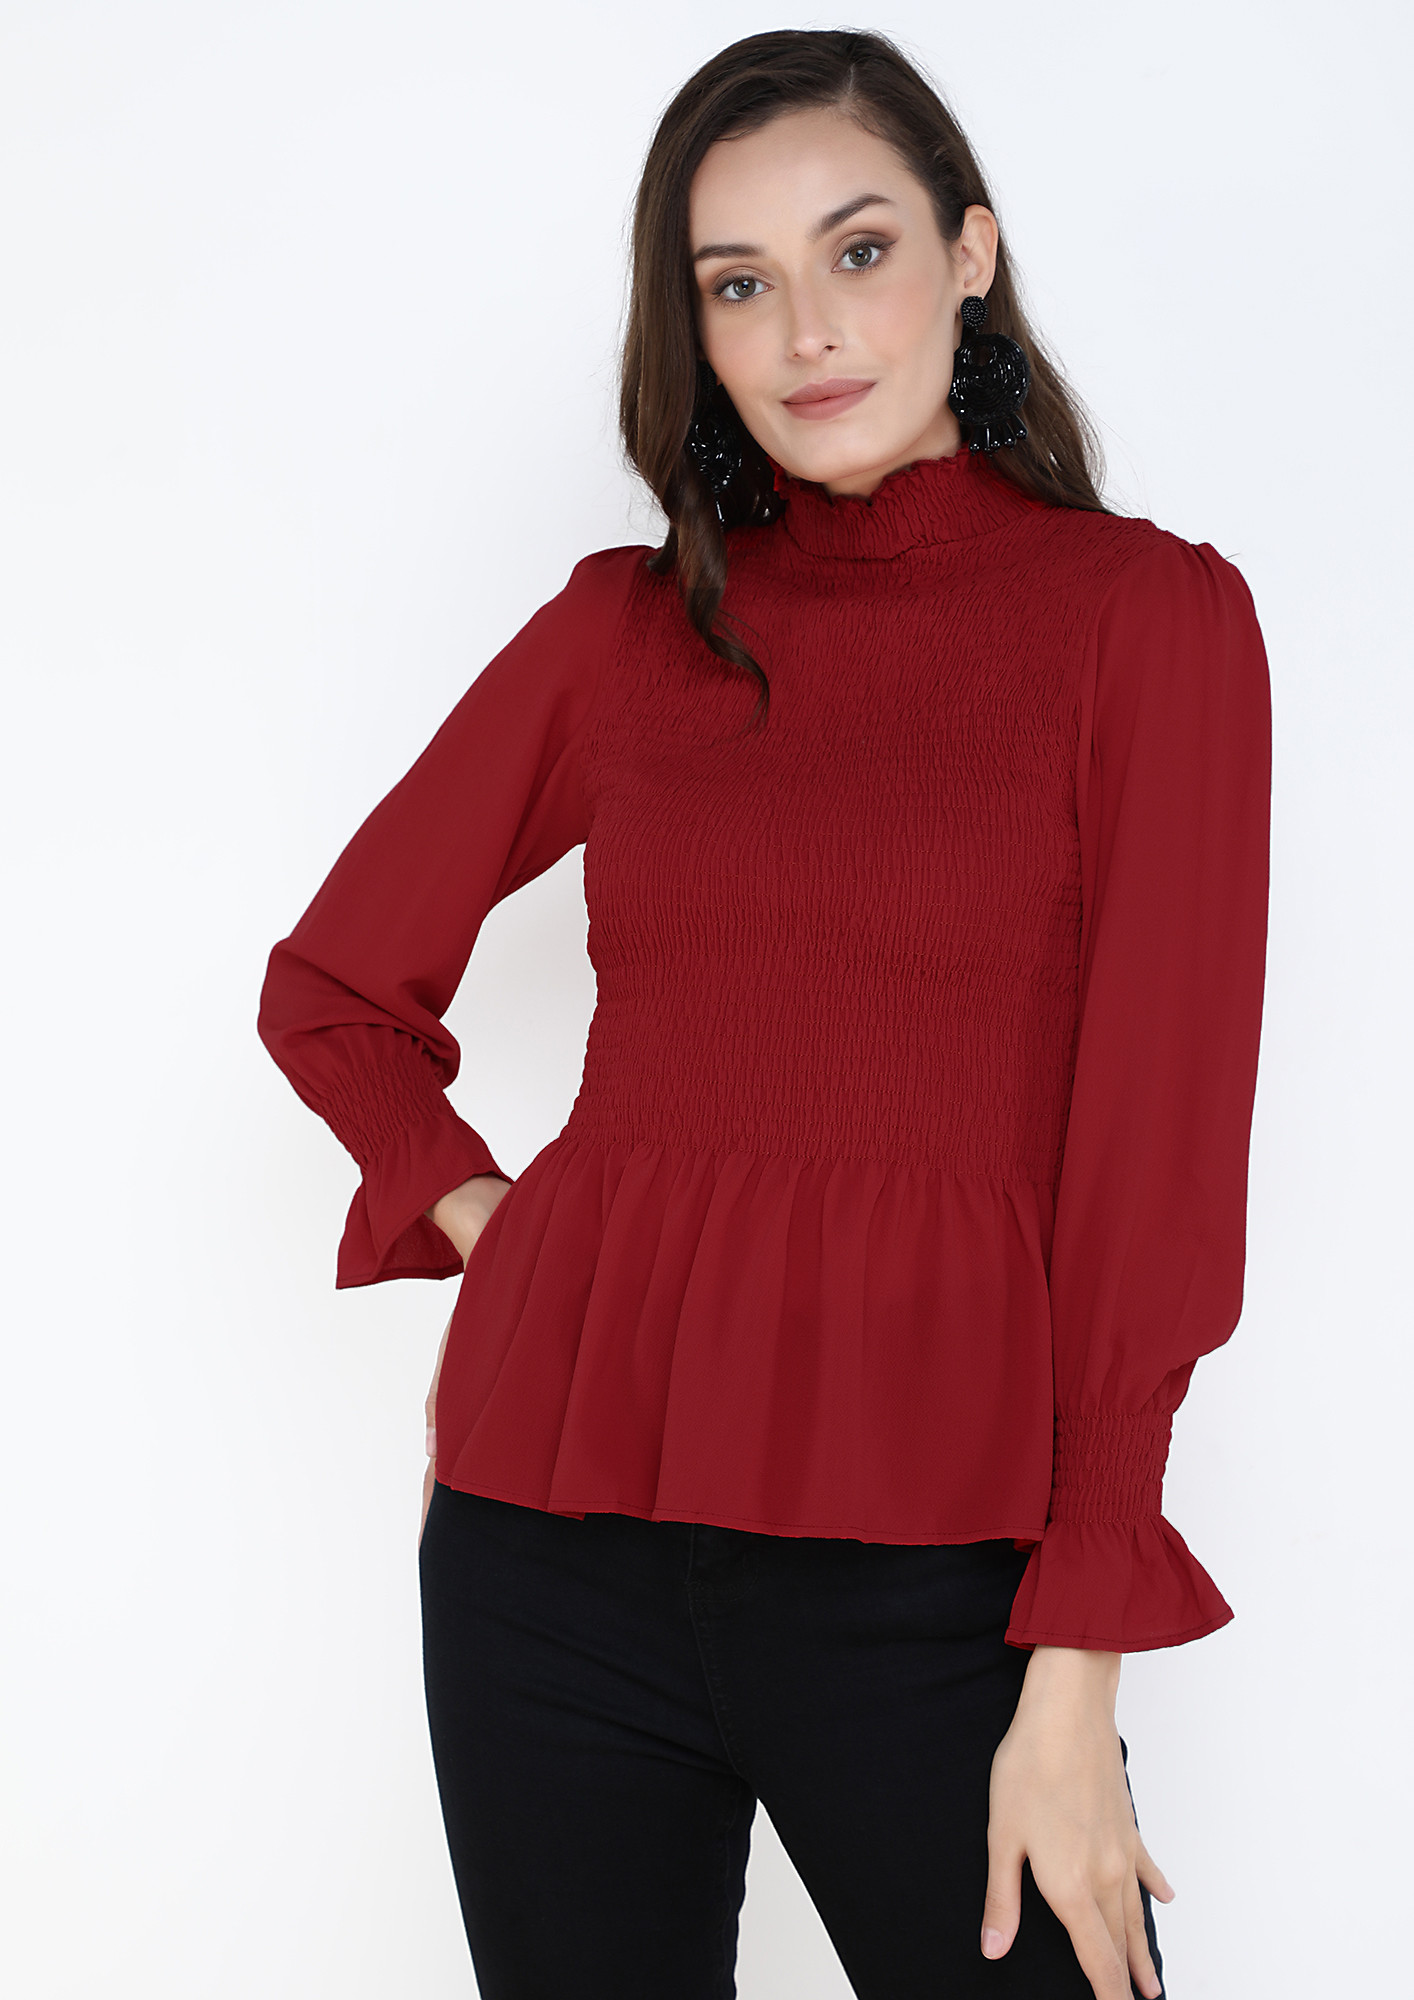 NIGHT OUT VIBES BURGUNDY TOP